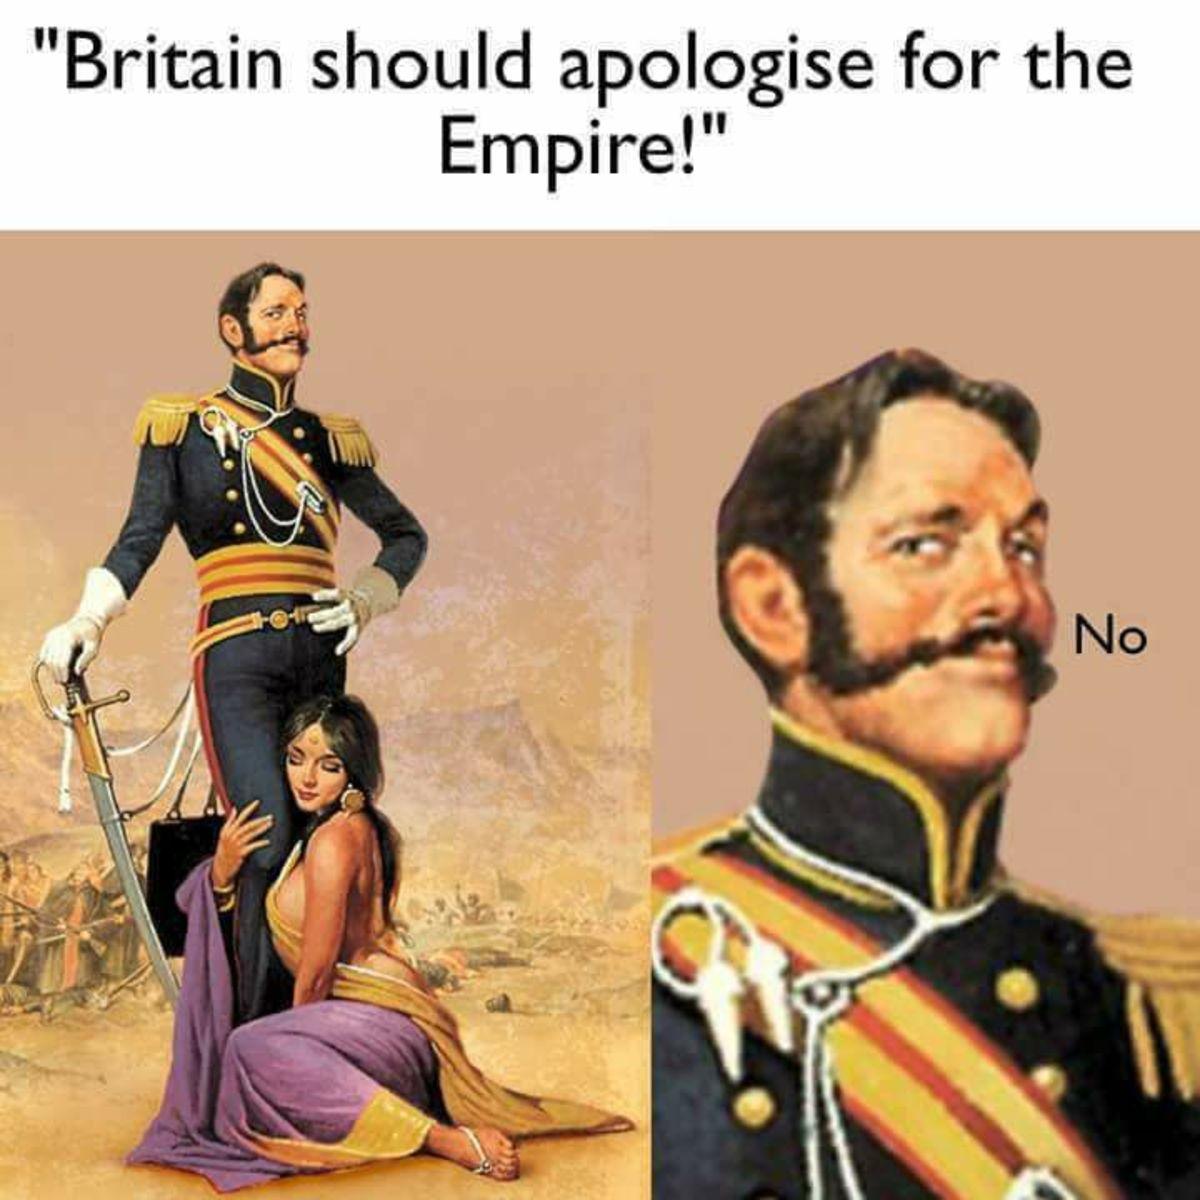 memes - harry flashman - "Britain should apologise for the Empire!" No